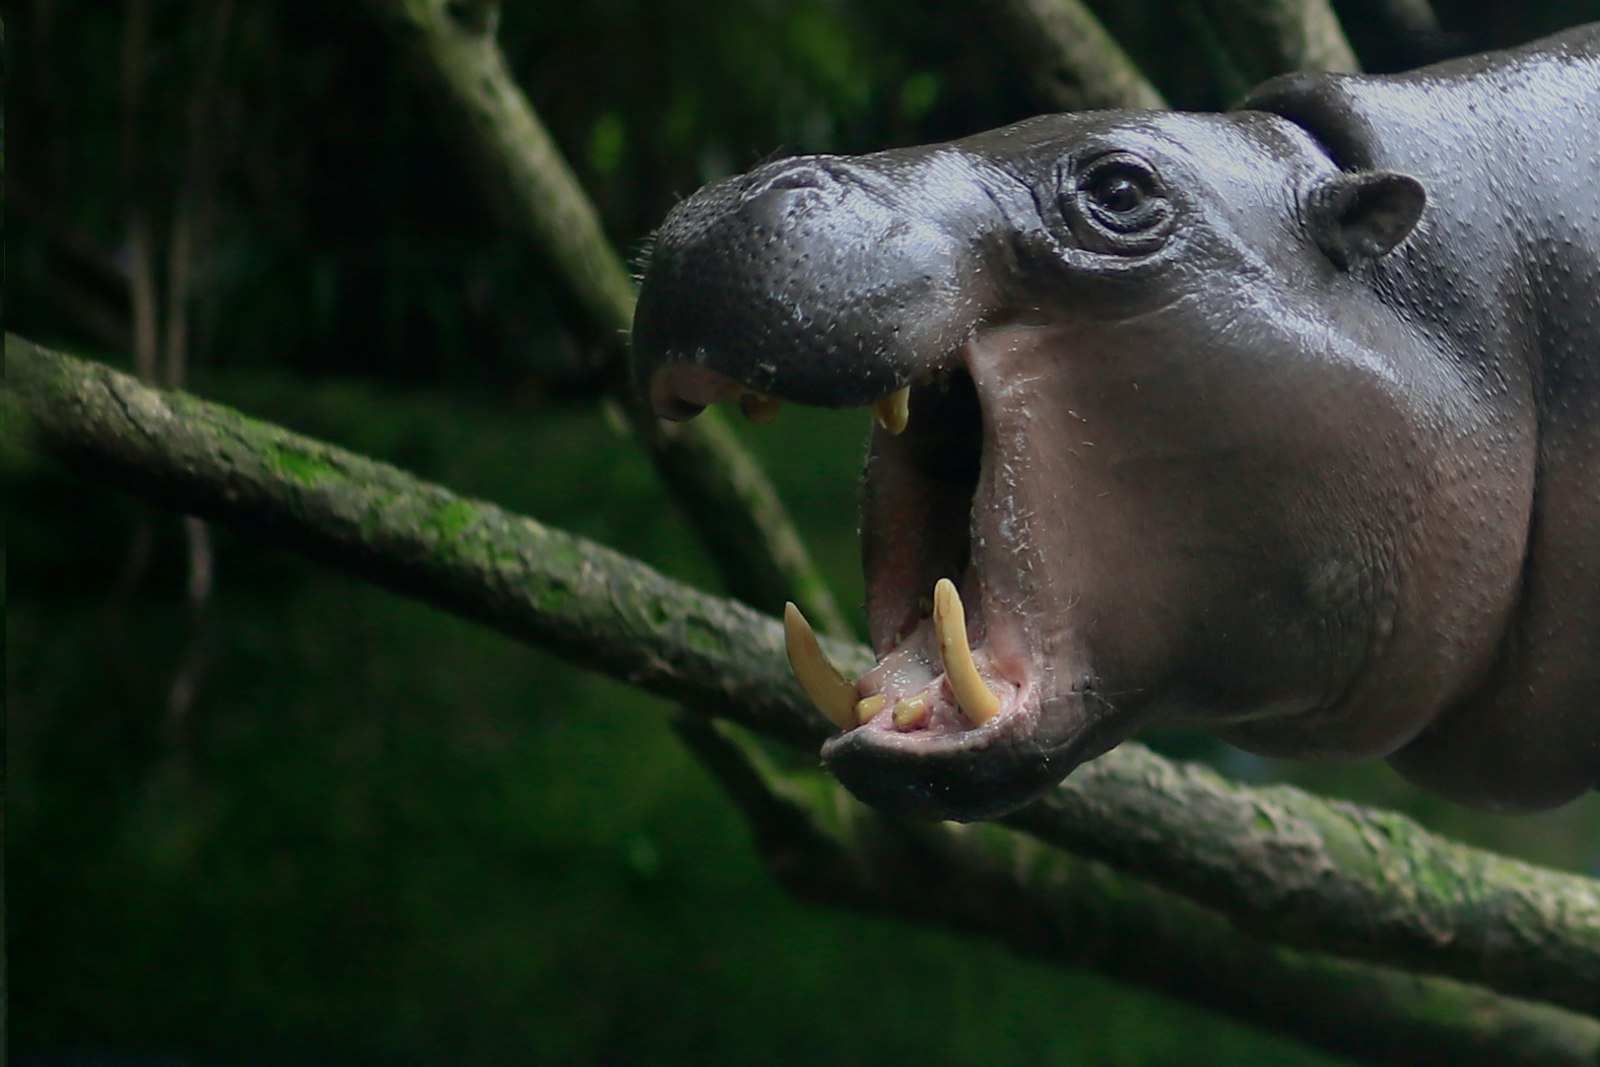 A pygmy hippo's head, with open jaws and large teeth, sticks into the frame of this image from the right side; in the background are fallen trees in a swampy environment